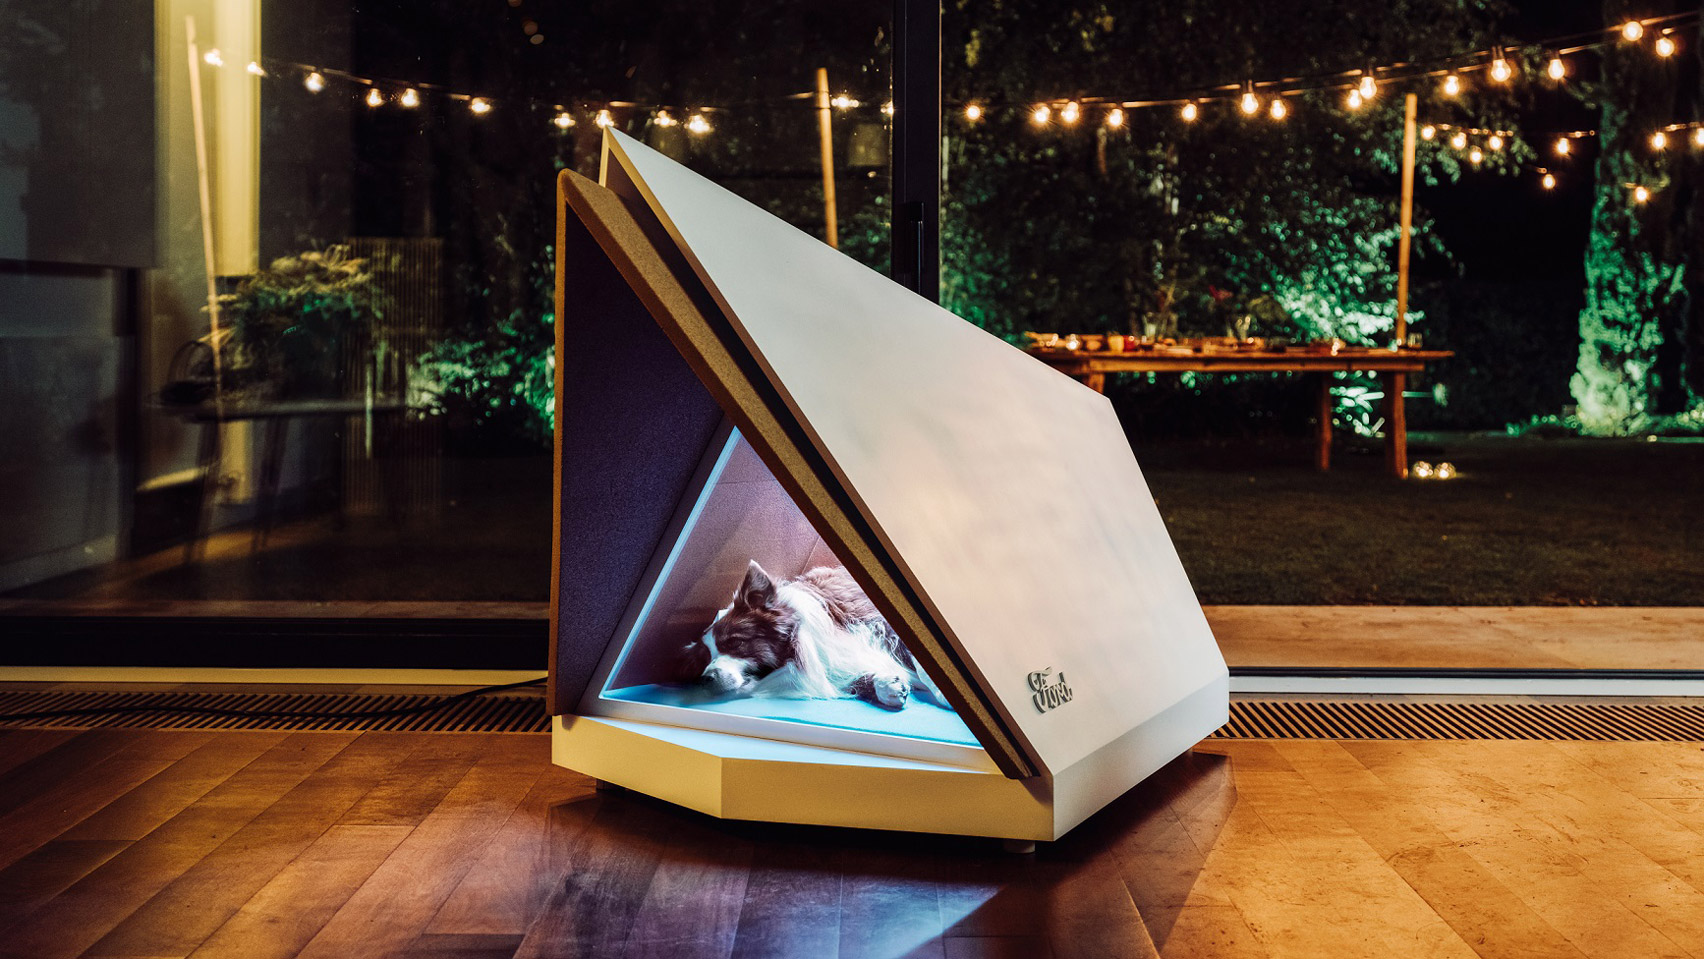 soundproof tent for dogs